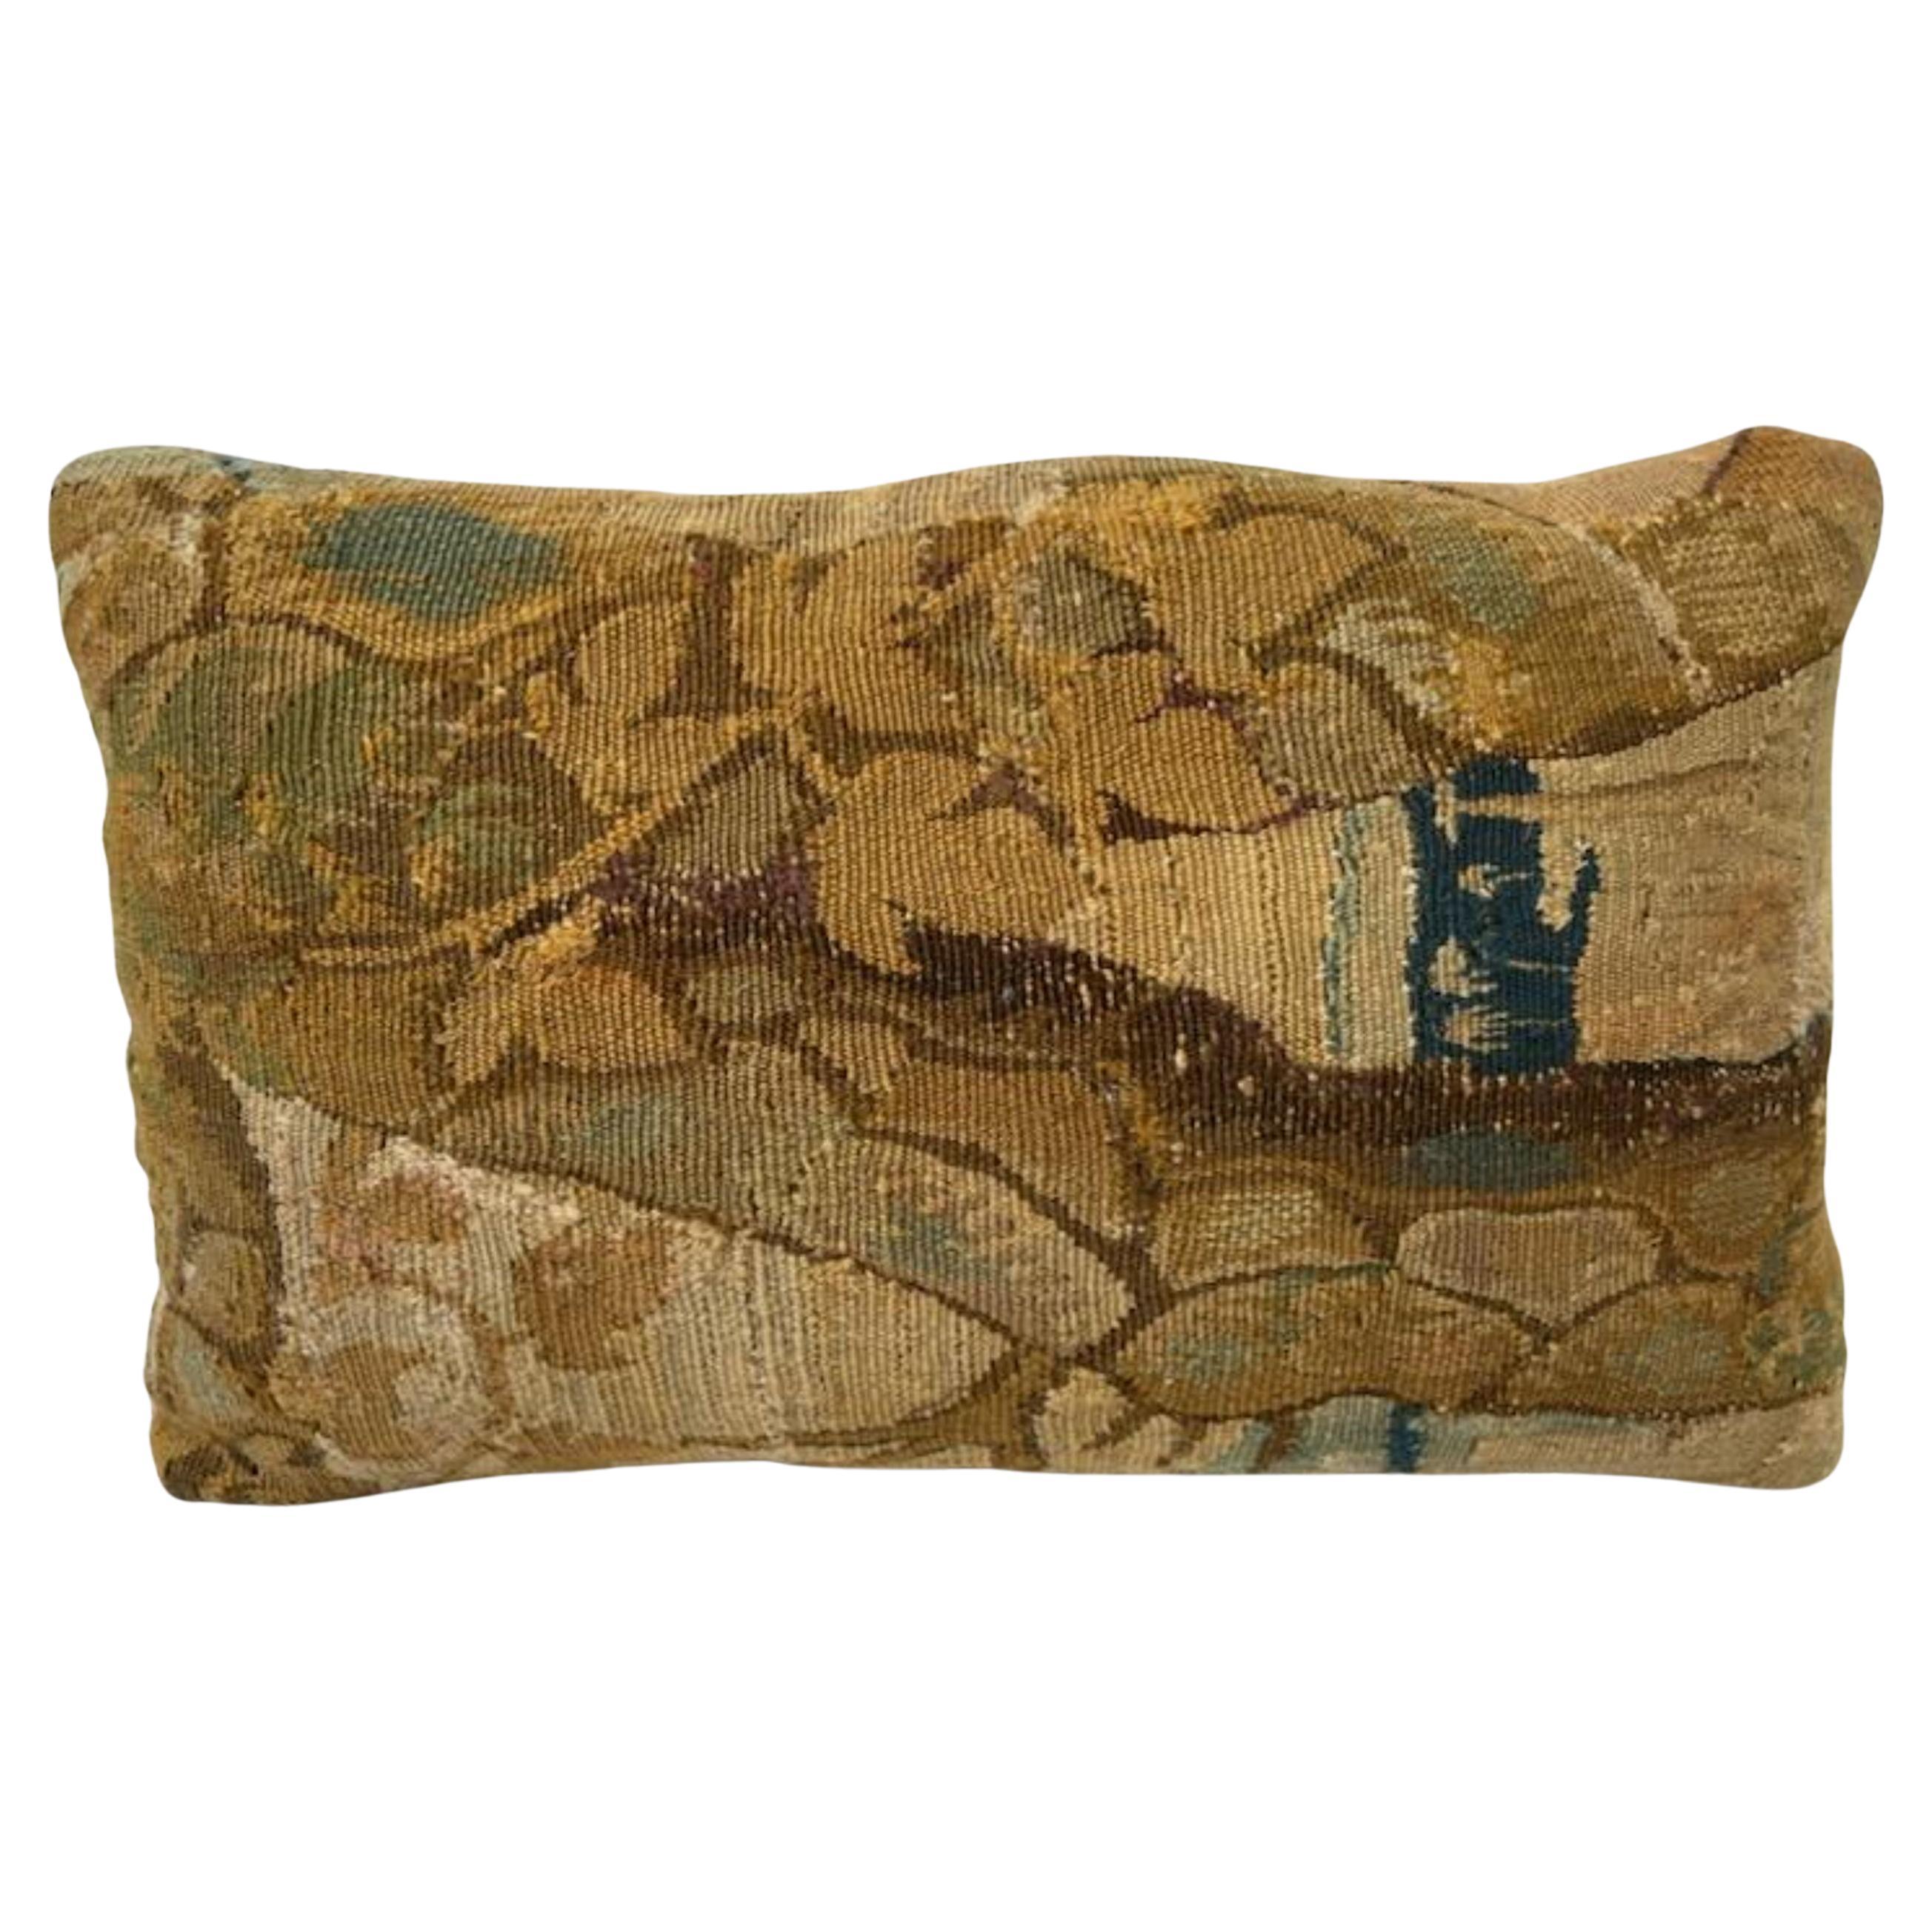 Throw Pillow Made from 16th Century Flemish Tapestry For Sale